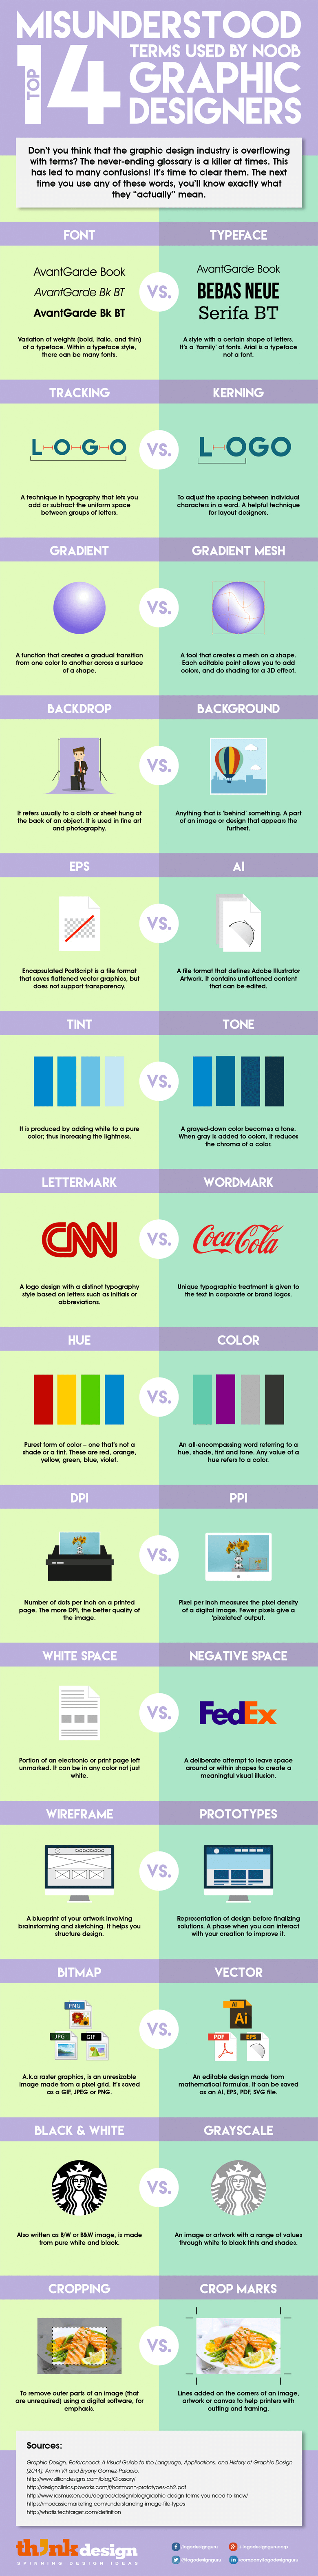 Terms That The Graphic Designers Always Get Wrong Infographic